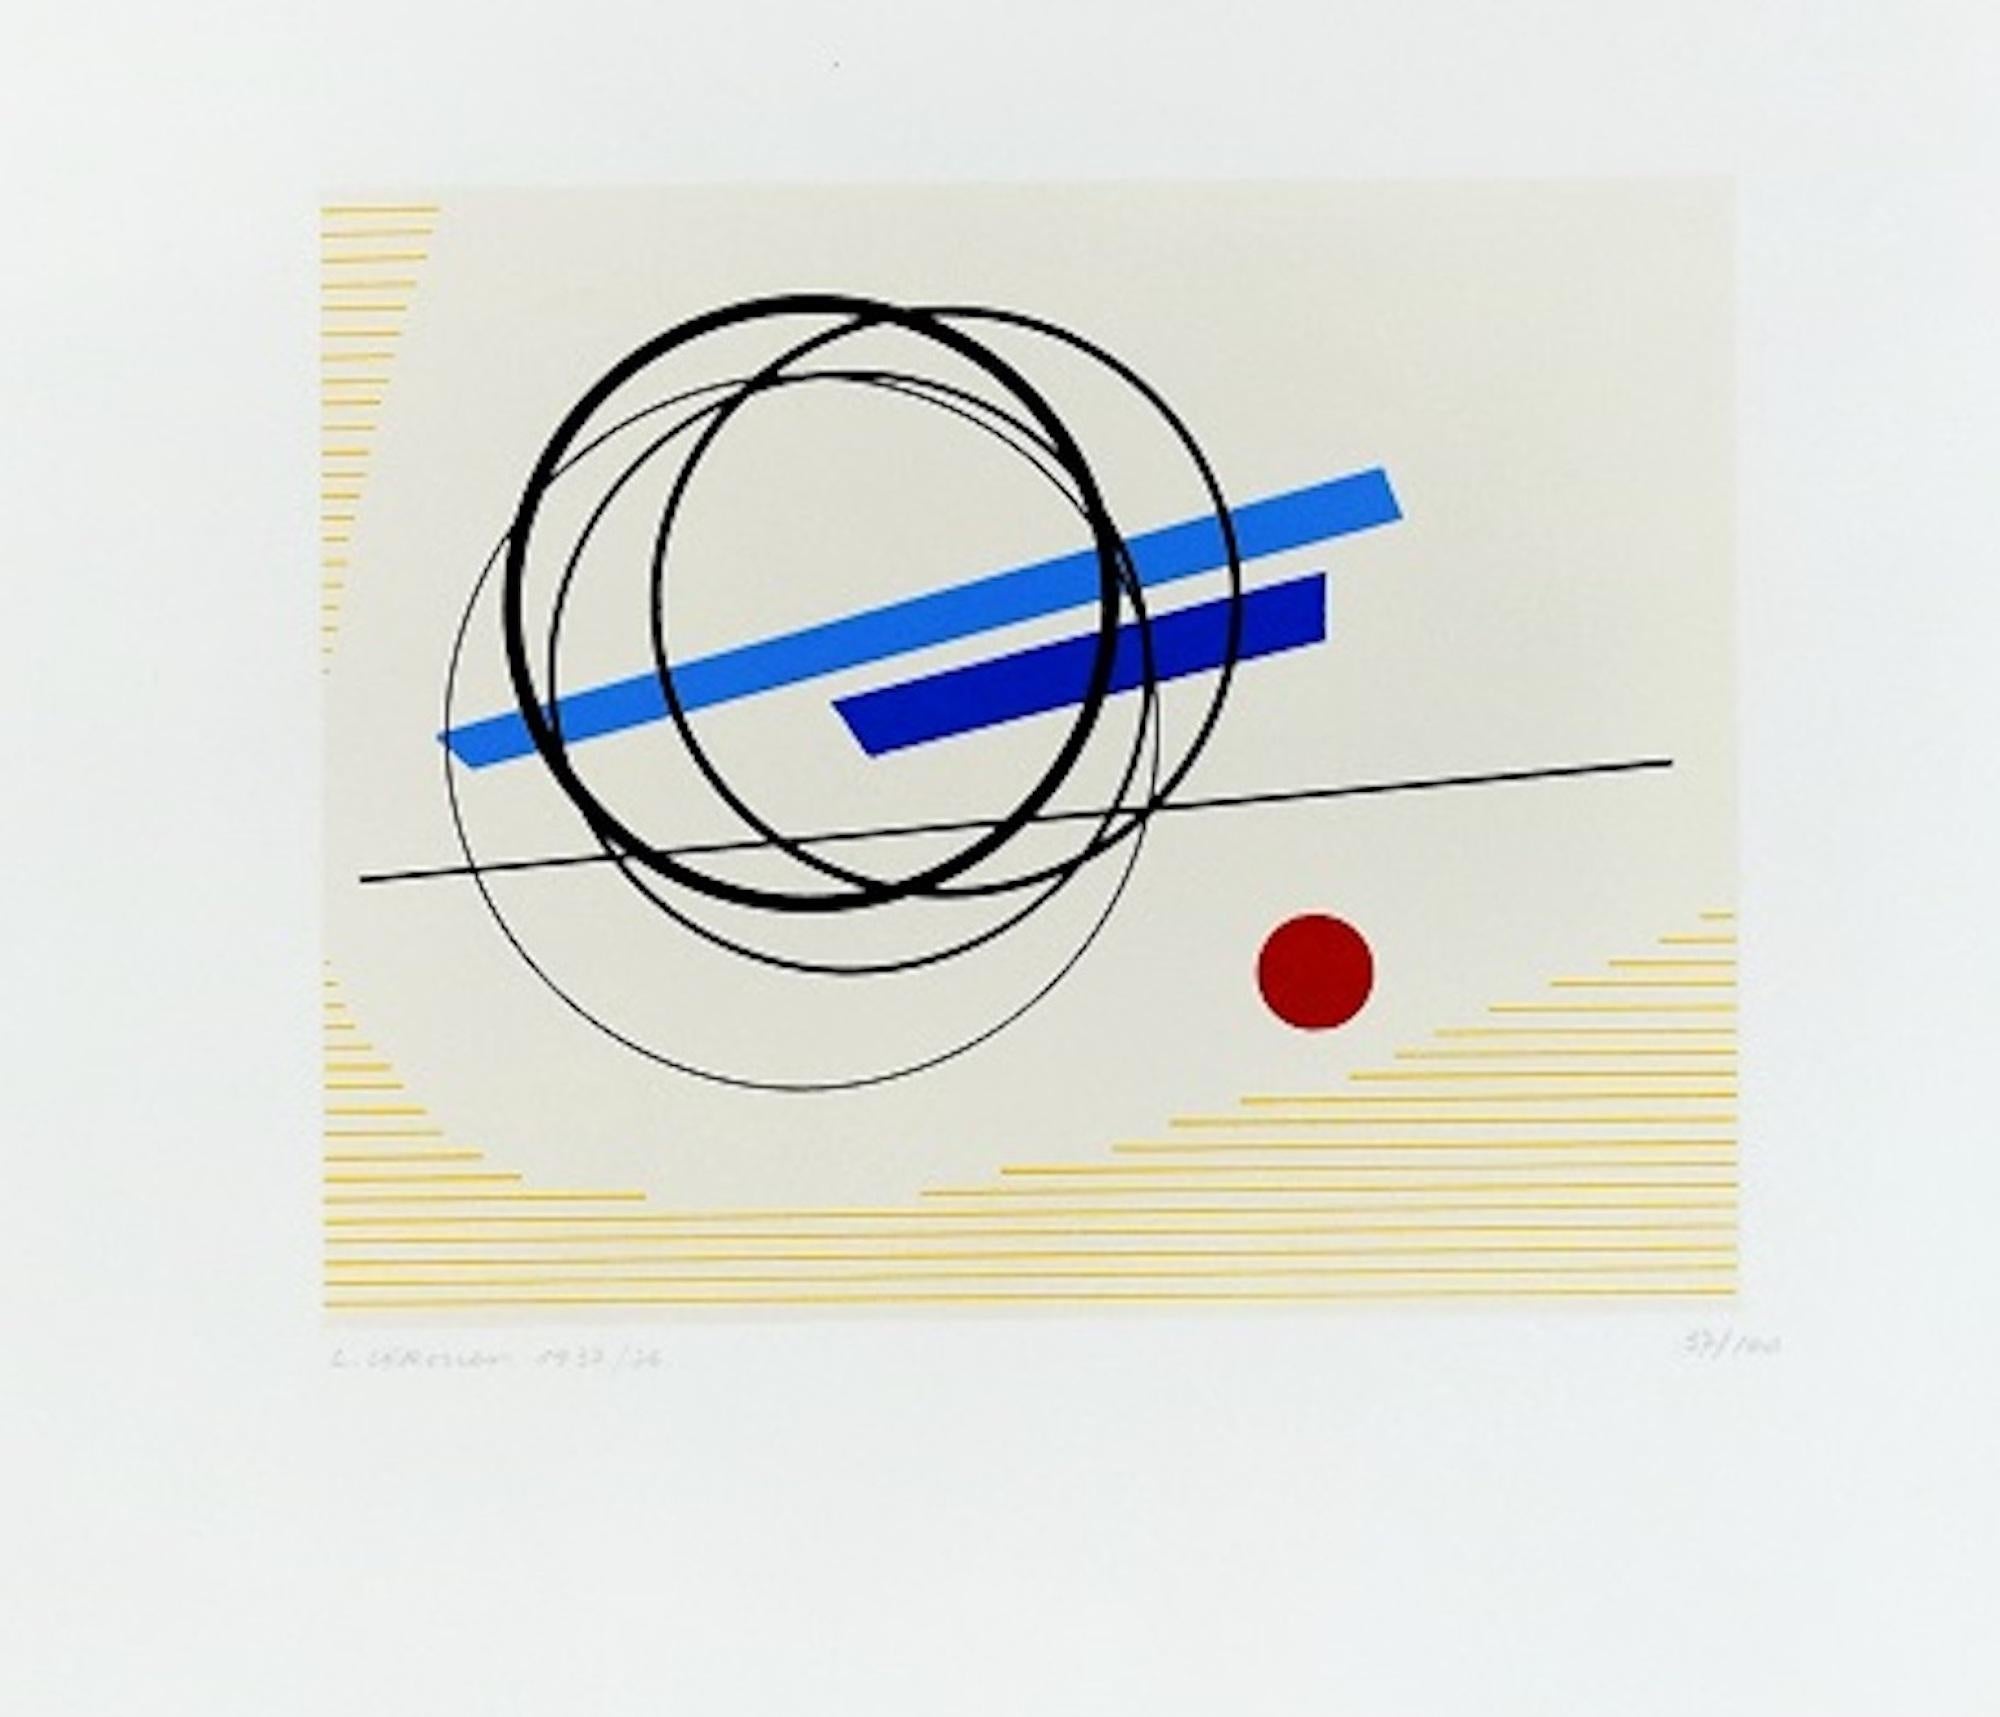 Image dimensions: 18x22.5 cm.

Untitled Serigraph is a beautiful colored serigraph on paper, realized in 1976 by the Italian artist, Luigi Veronesi. Hand-signed, dated and numbered in pencil on lower margin. Edition of 100 prints.

This contemporary